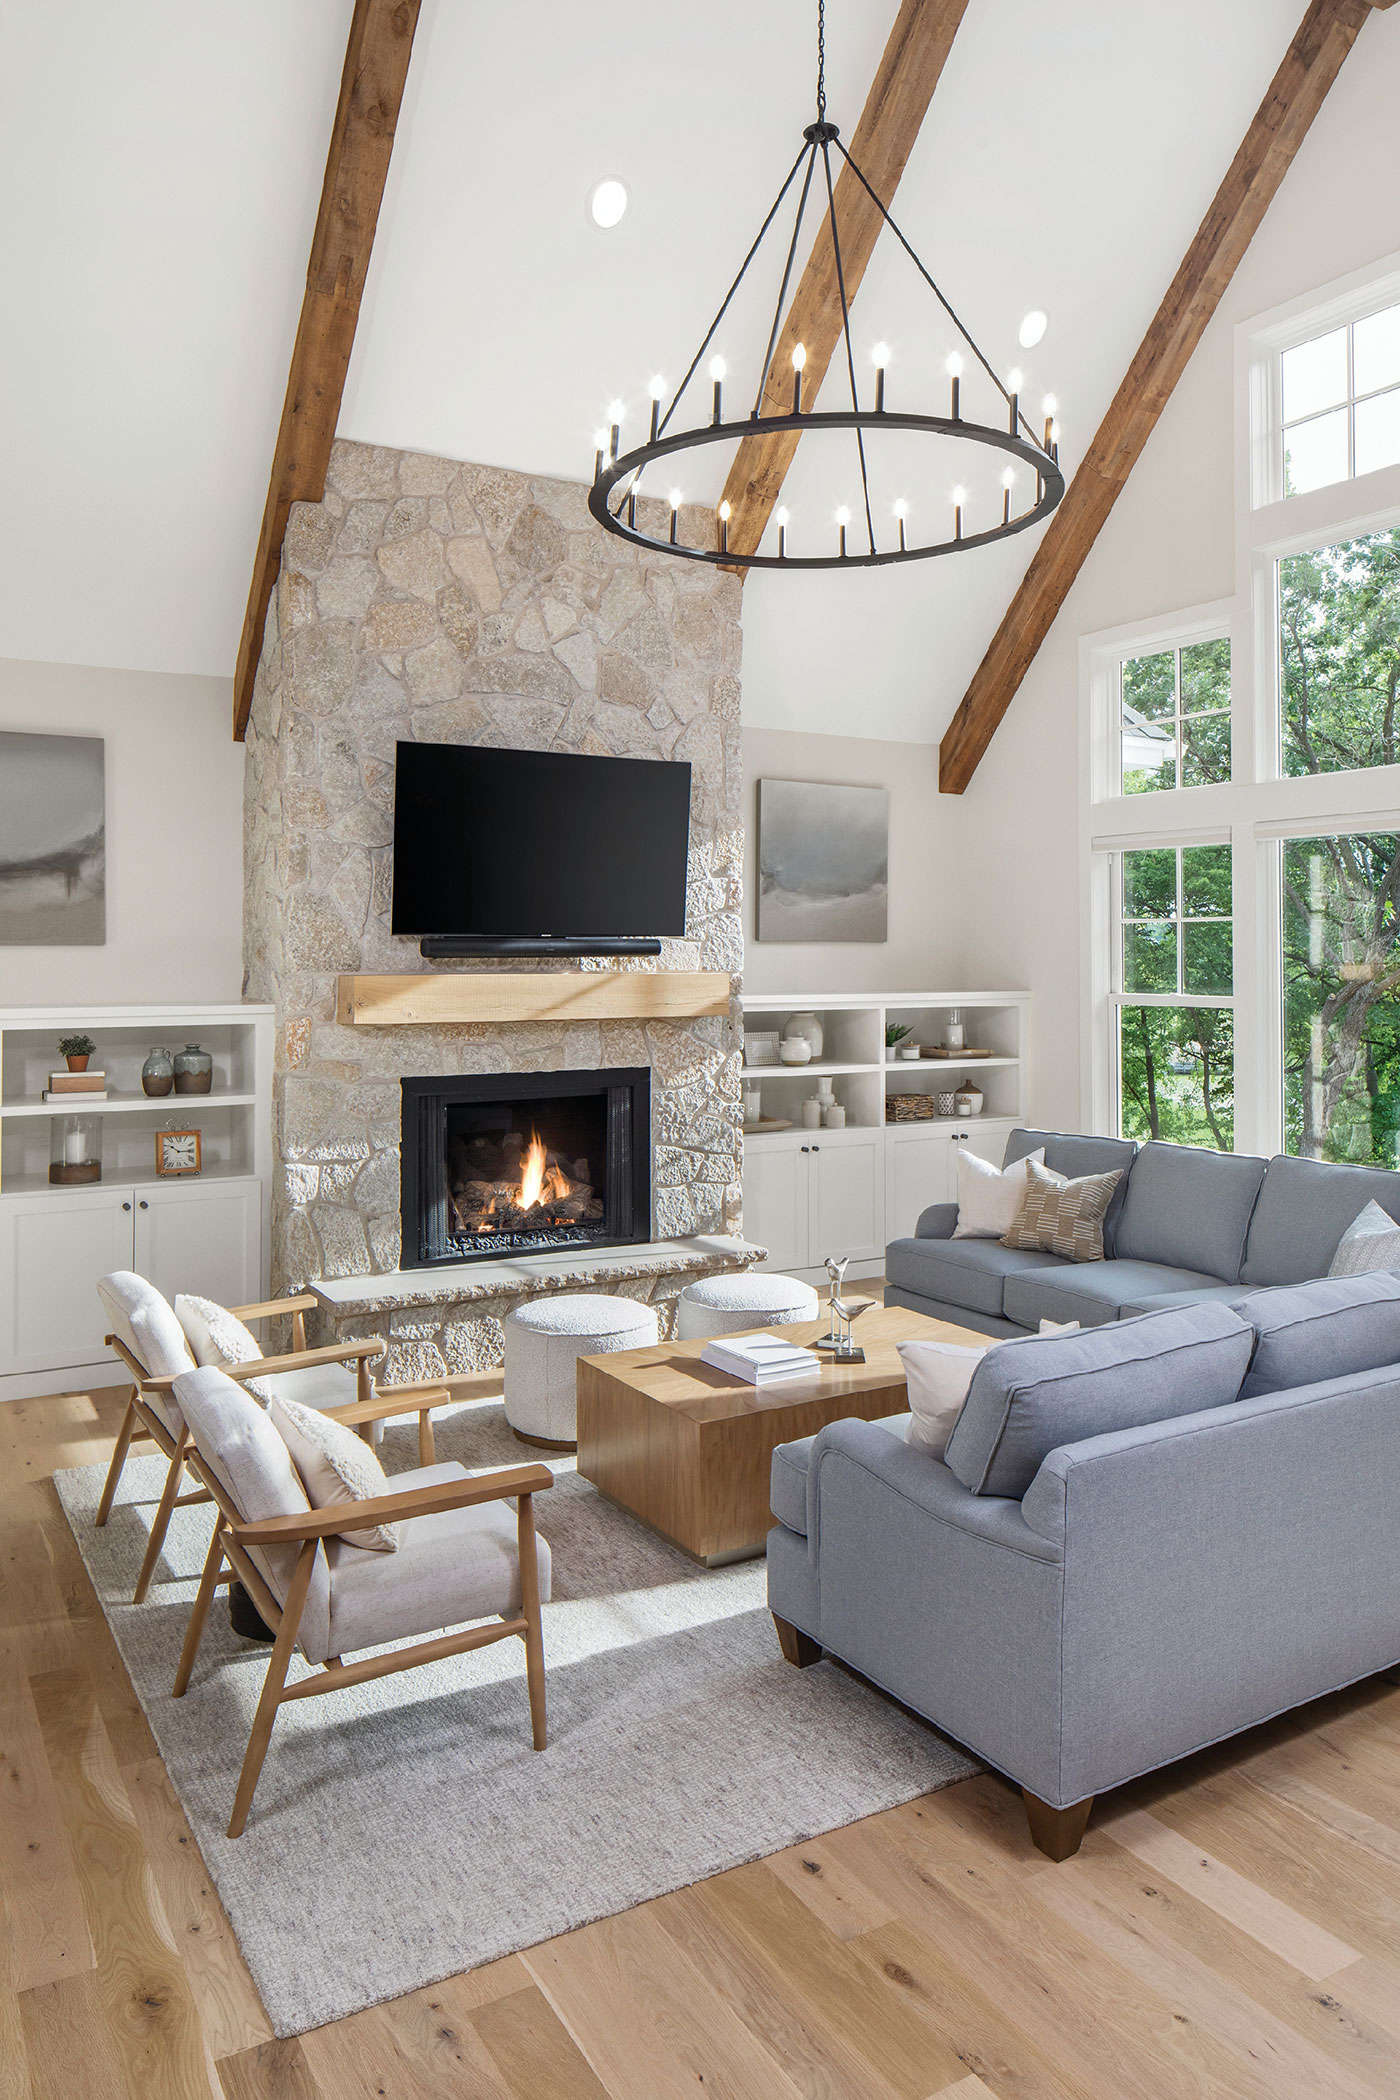 large windows flank a far wall in cathedral ceilinged family room with fireplace